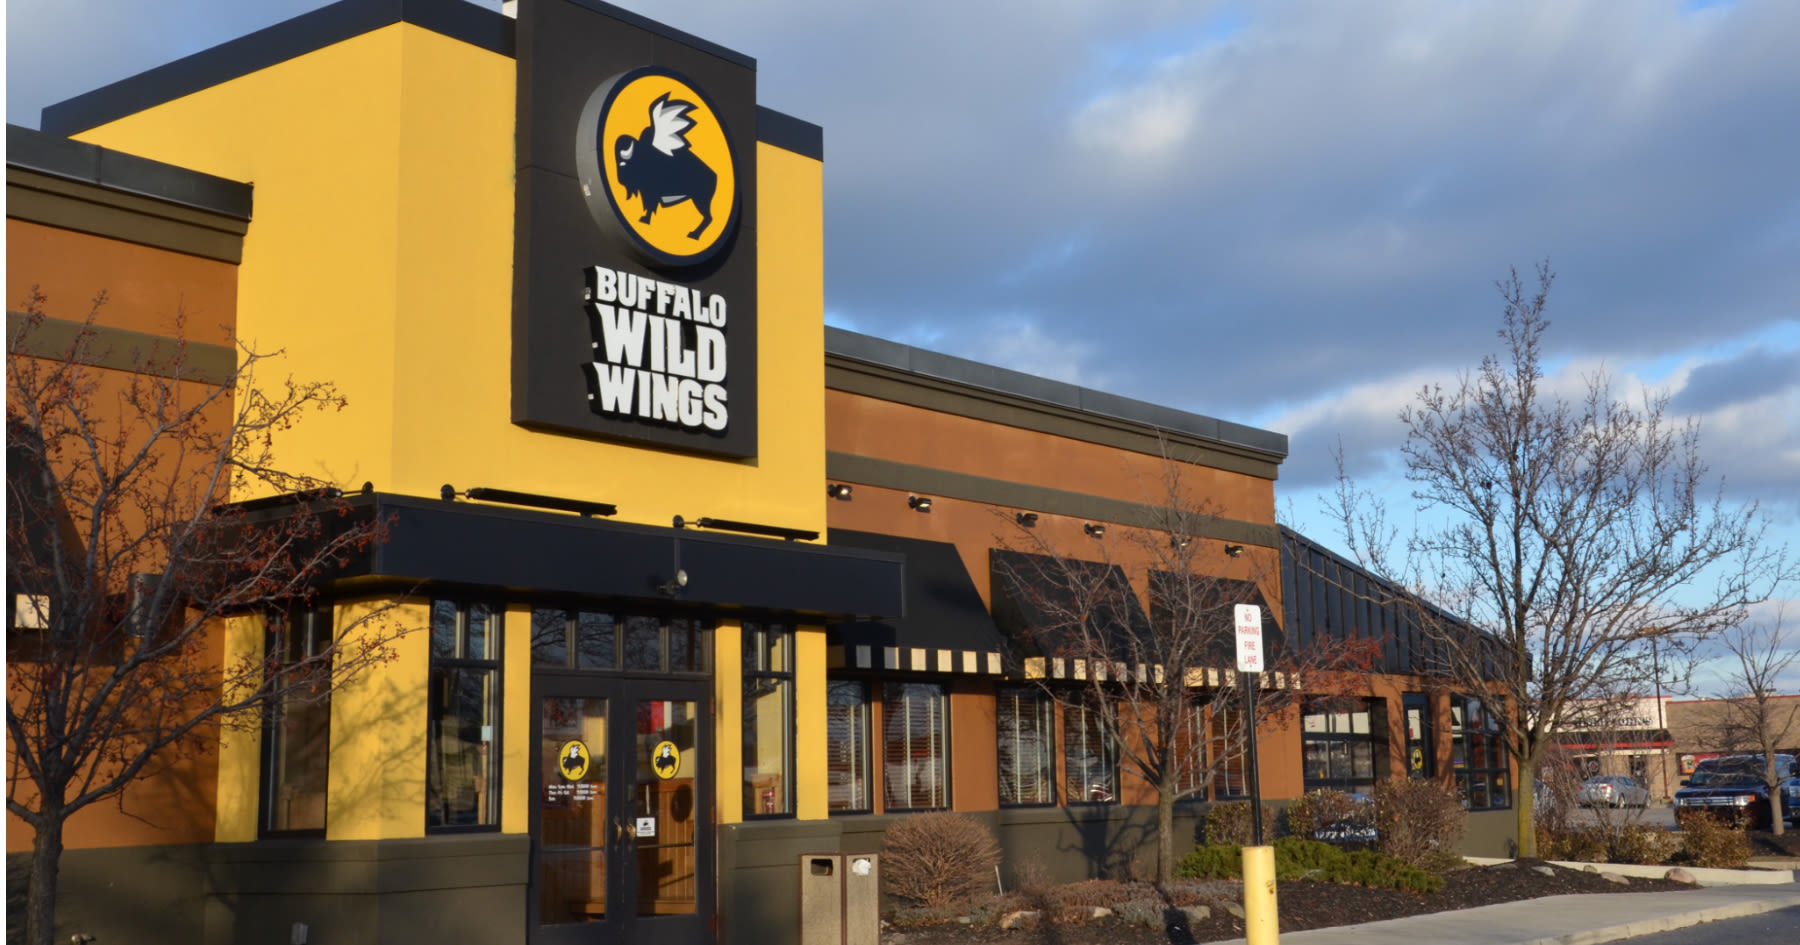 All-you-can-eat wings deliver traffic spike for Buffalo Wild Wings